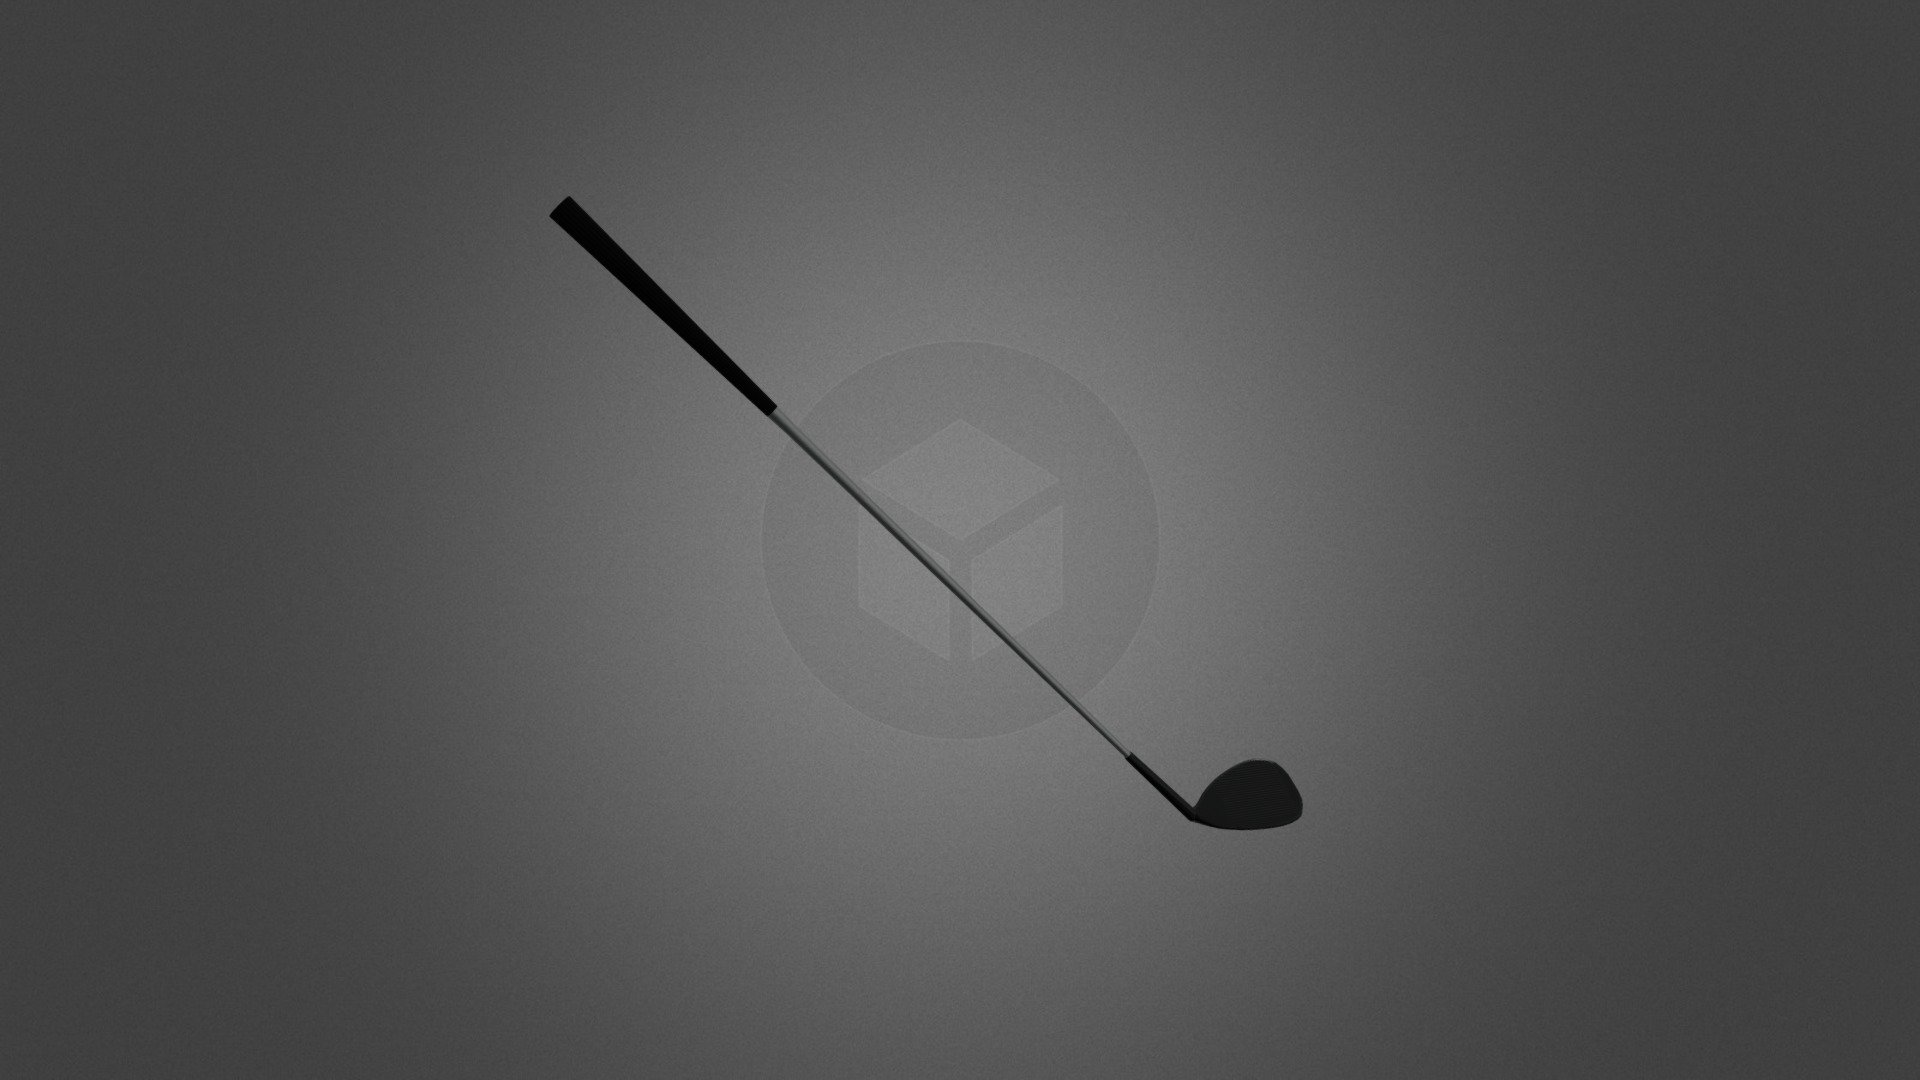 one of my first hard surface models - Hard surface model - 52° Wedge golf club - 3D model by ryanogrady 3d model